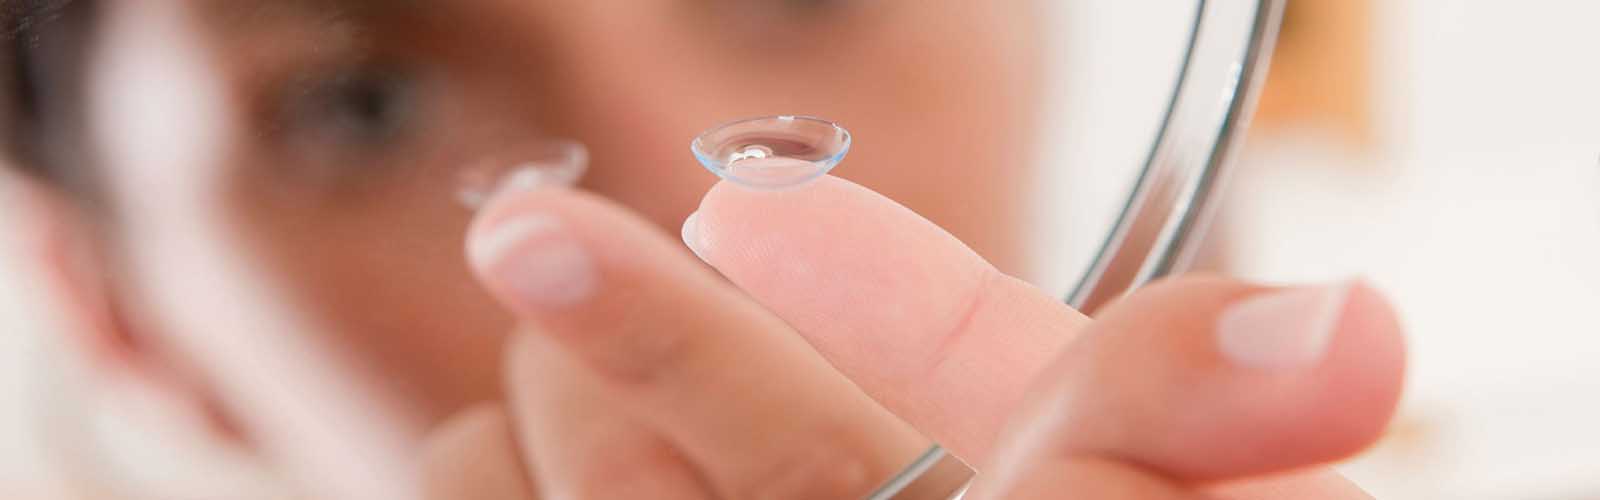 Cheating Contact Lenses In Delhi